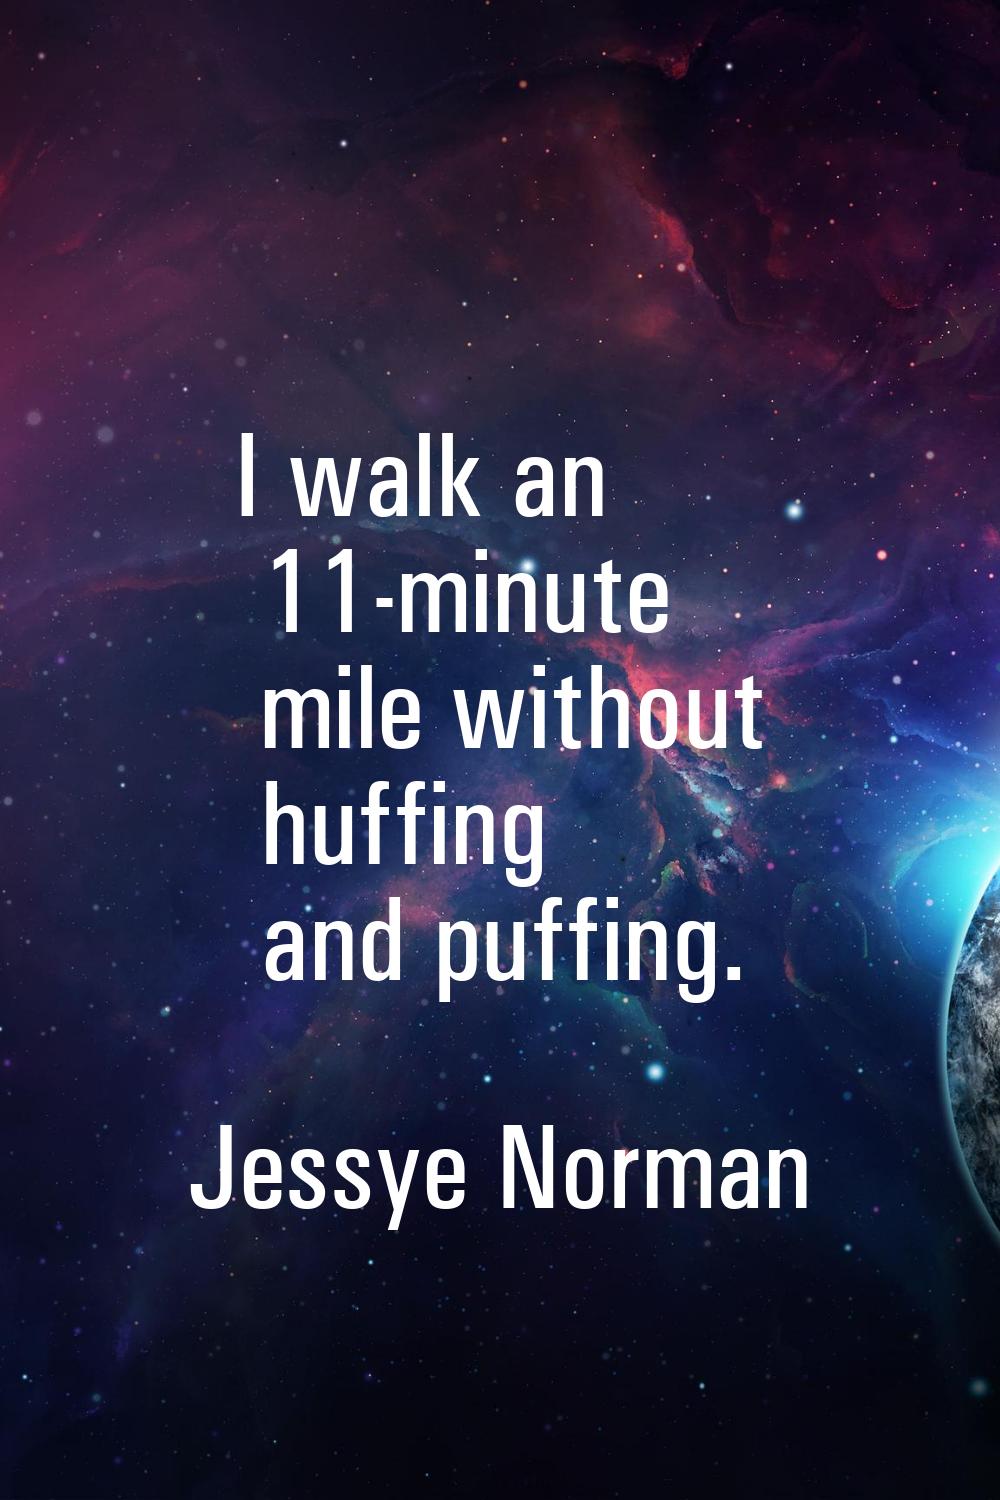 I walk an 11-minute mile without huffing and puffing.